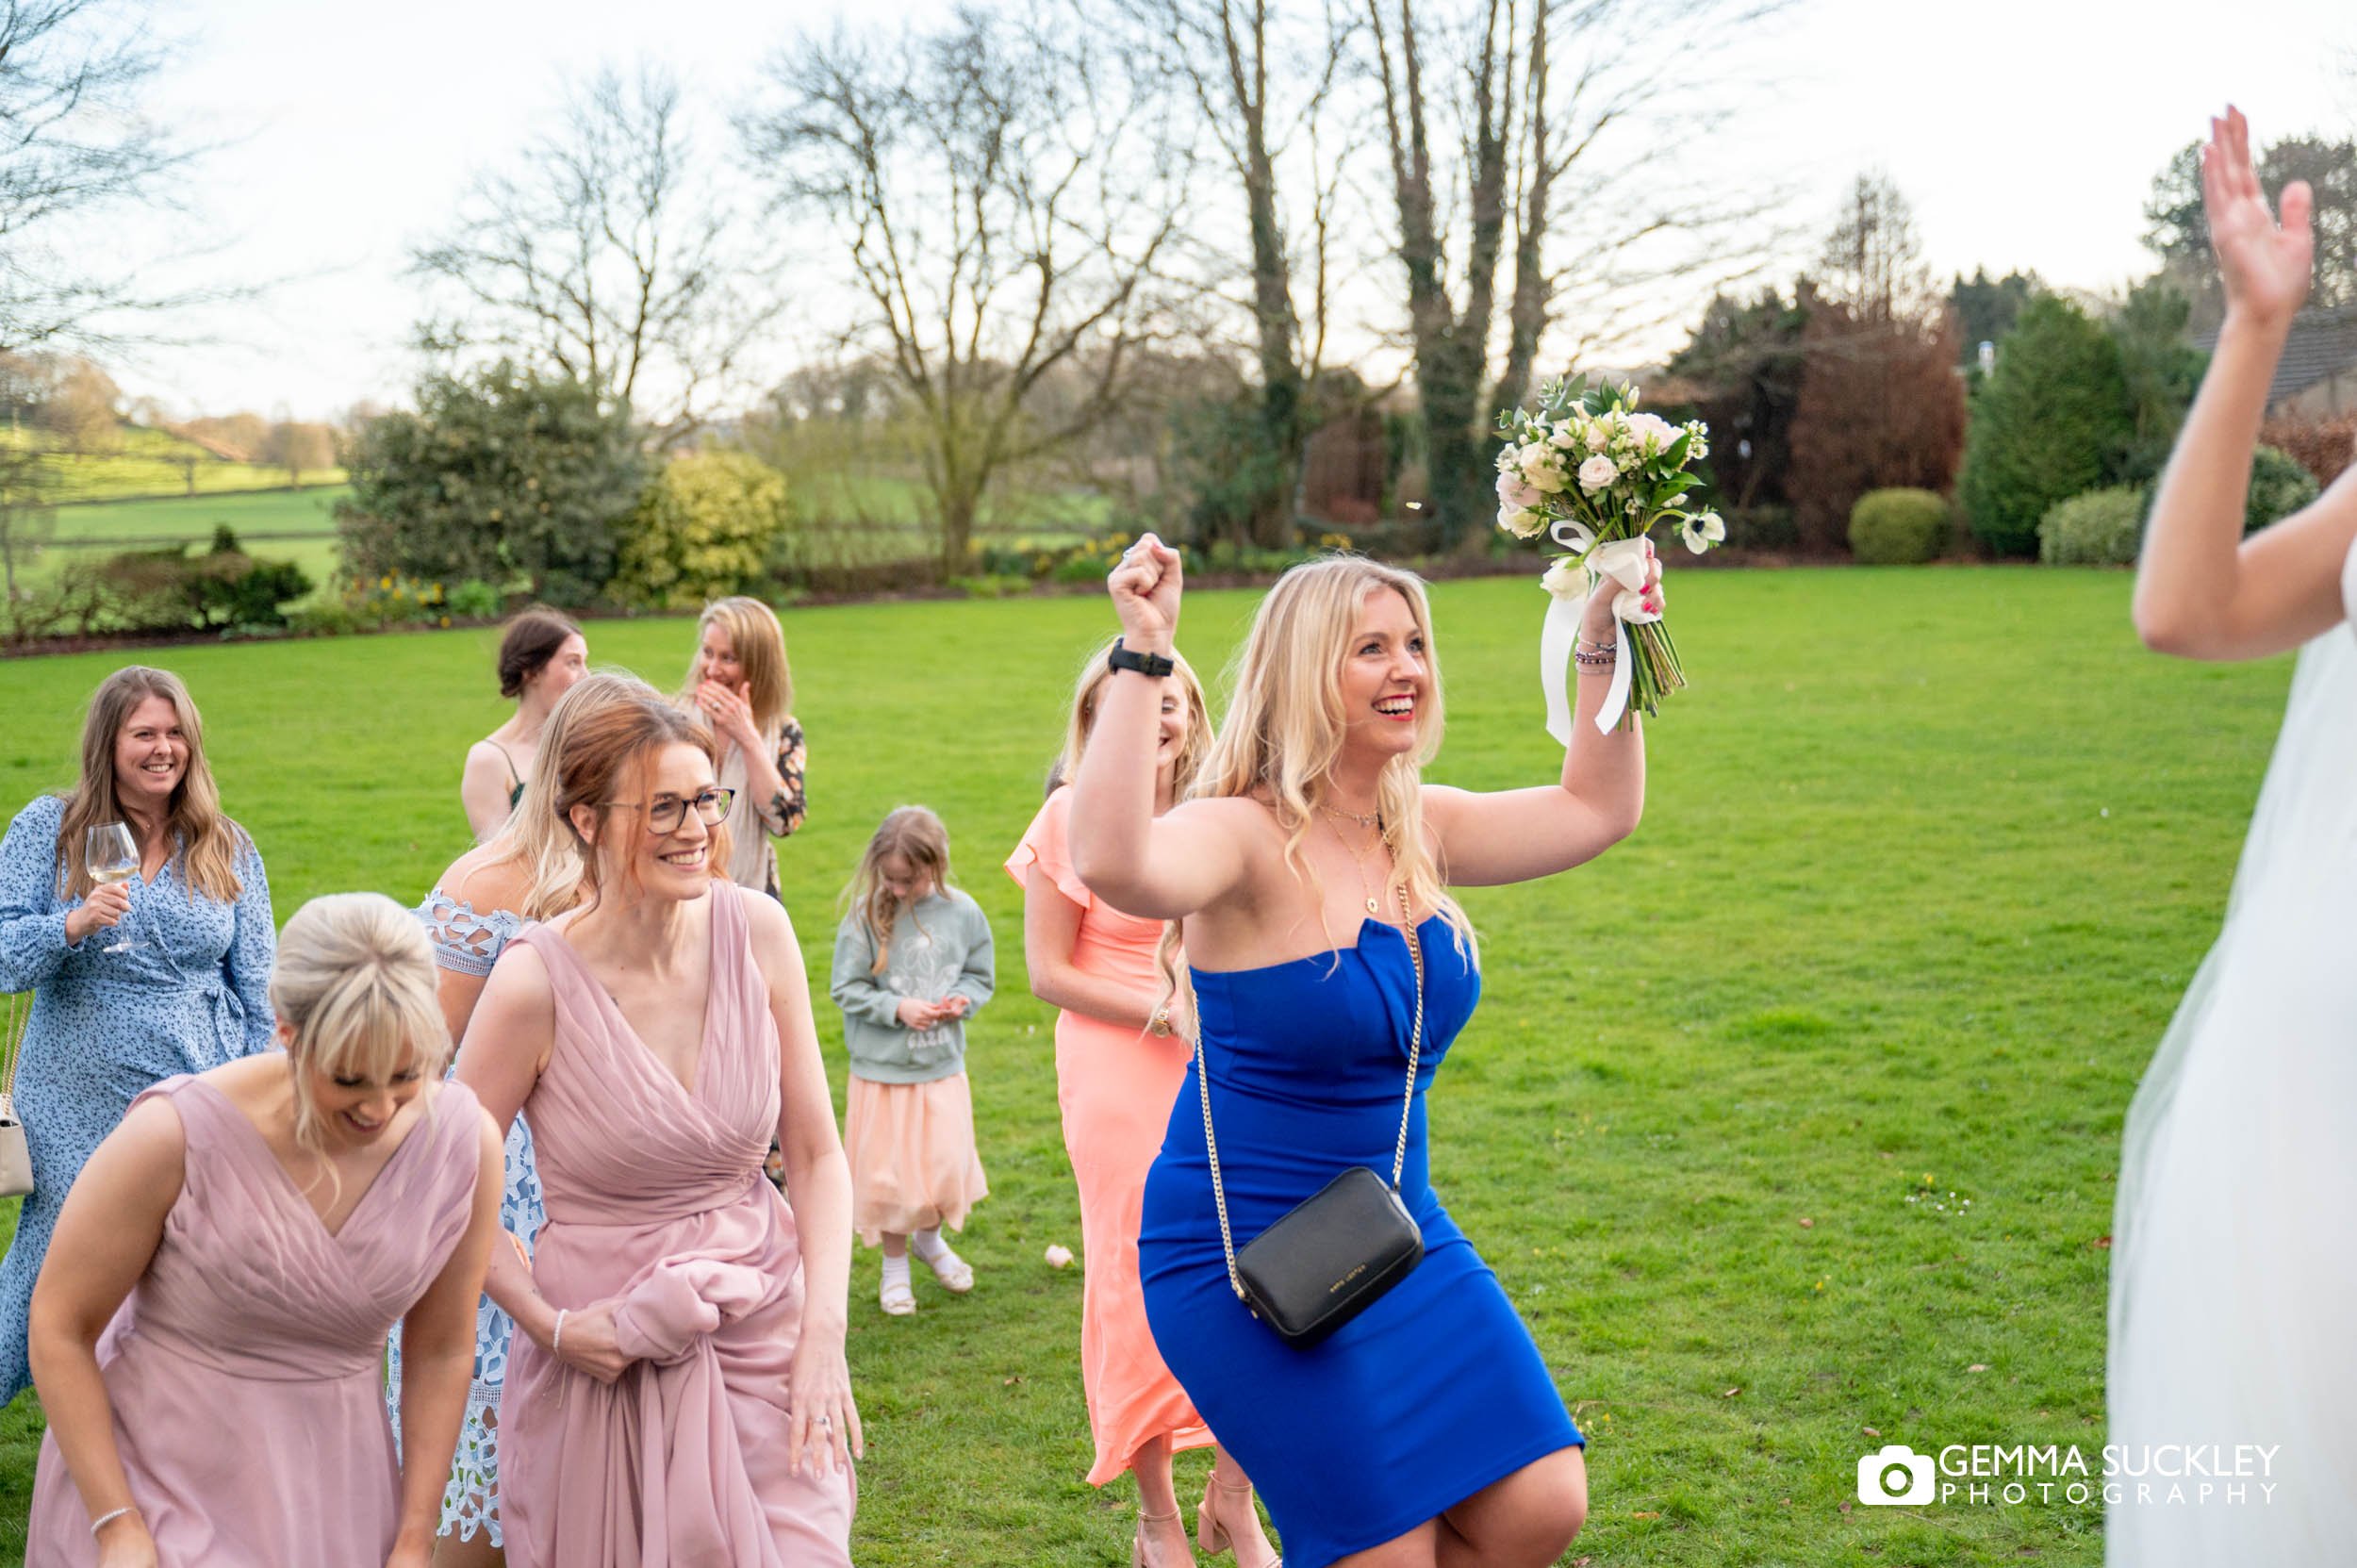 a lady looking happy after catching the tossed bouquet